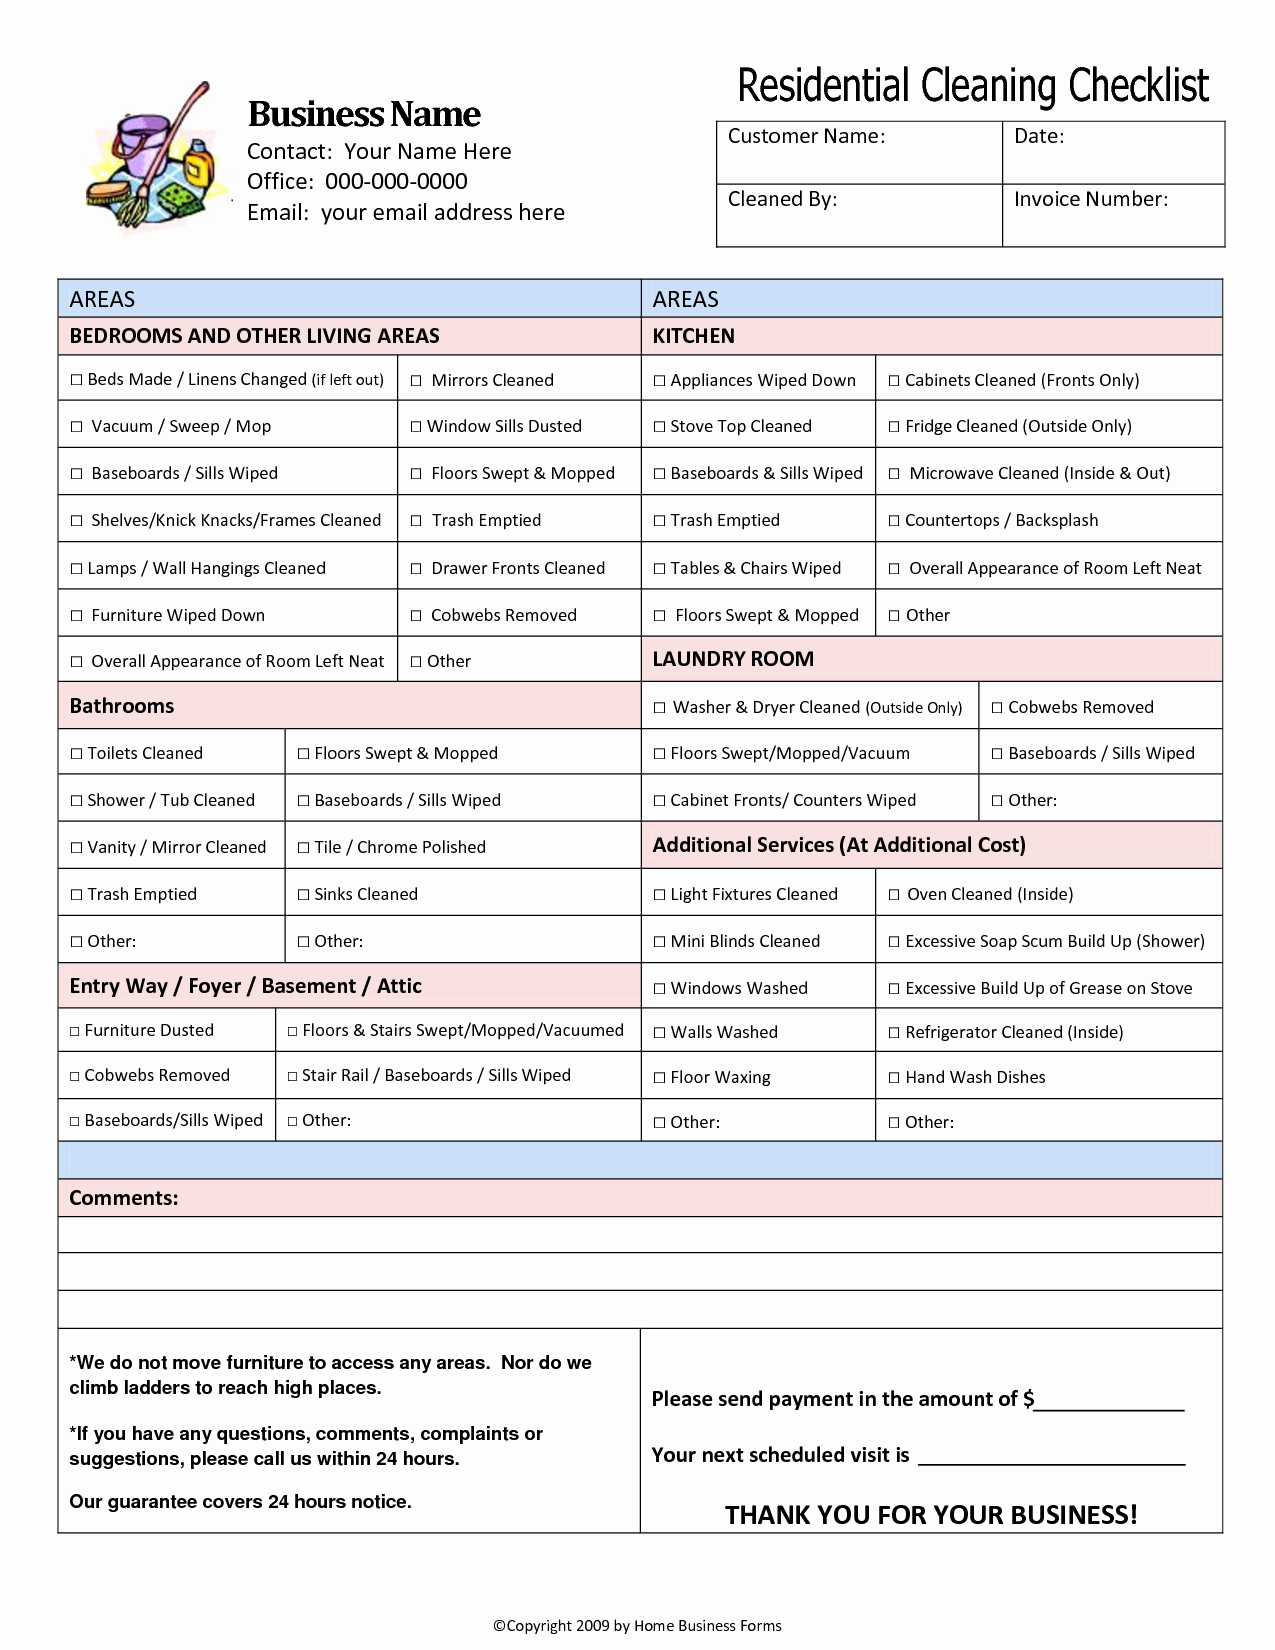 Commercial Cleaning Checklist Template Fresh Residential House Cleaning Checklist